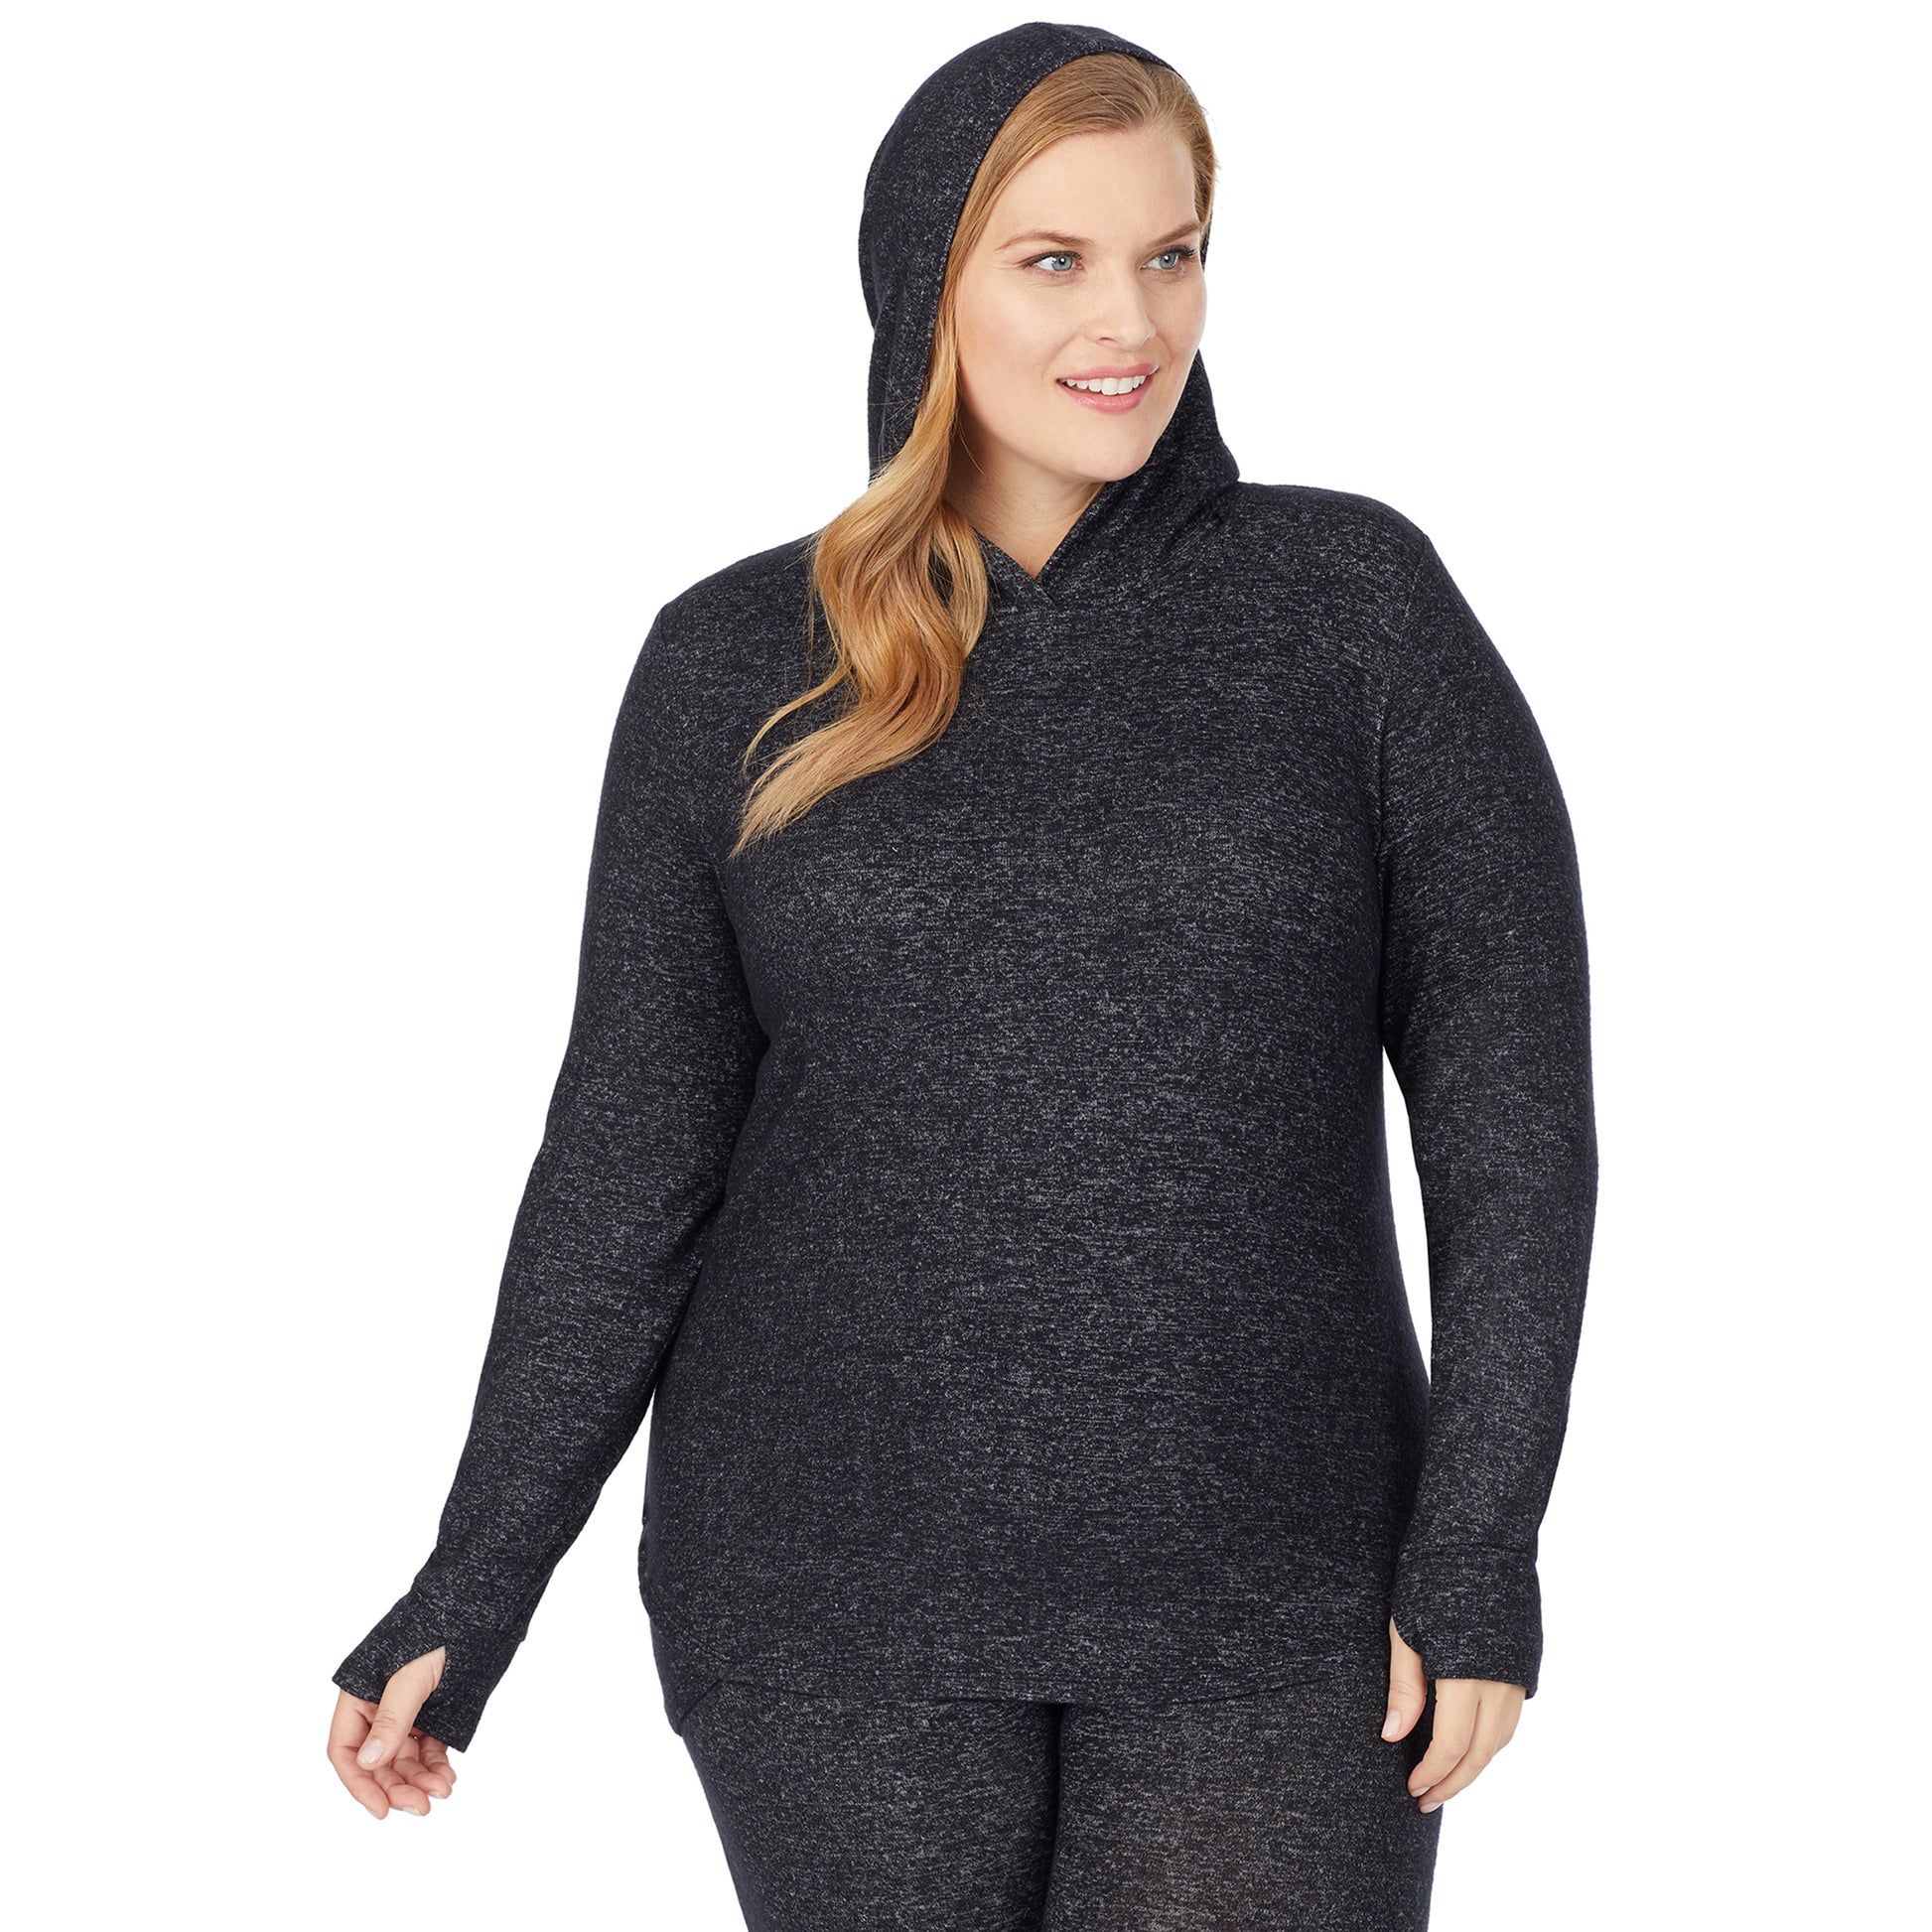 Marled Dark Charcoal; Model is wearing size 1X. She is 5'9", Bust 38", Waist 36", Hips 48.5". @A lady wearing a marled dark charcoal long sleeve tunic hoodie plus.